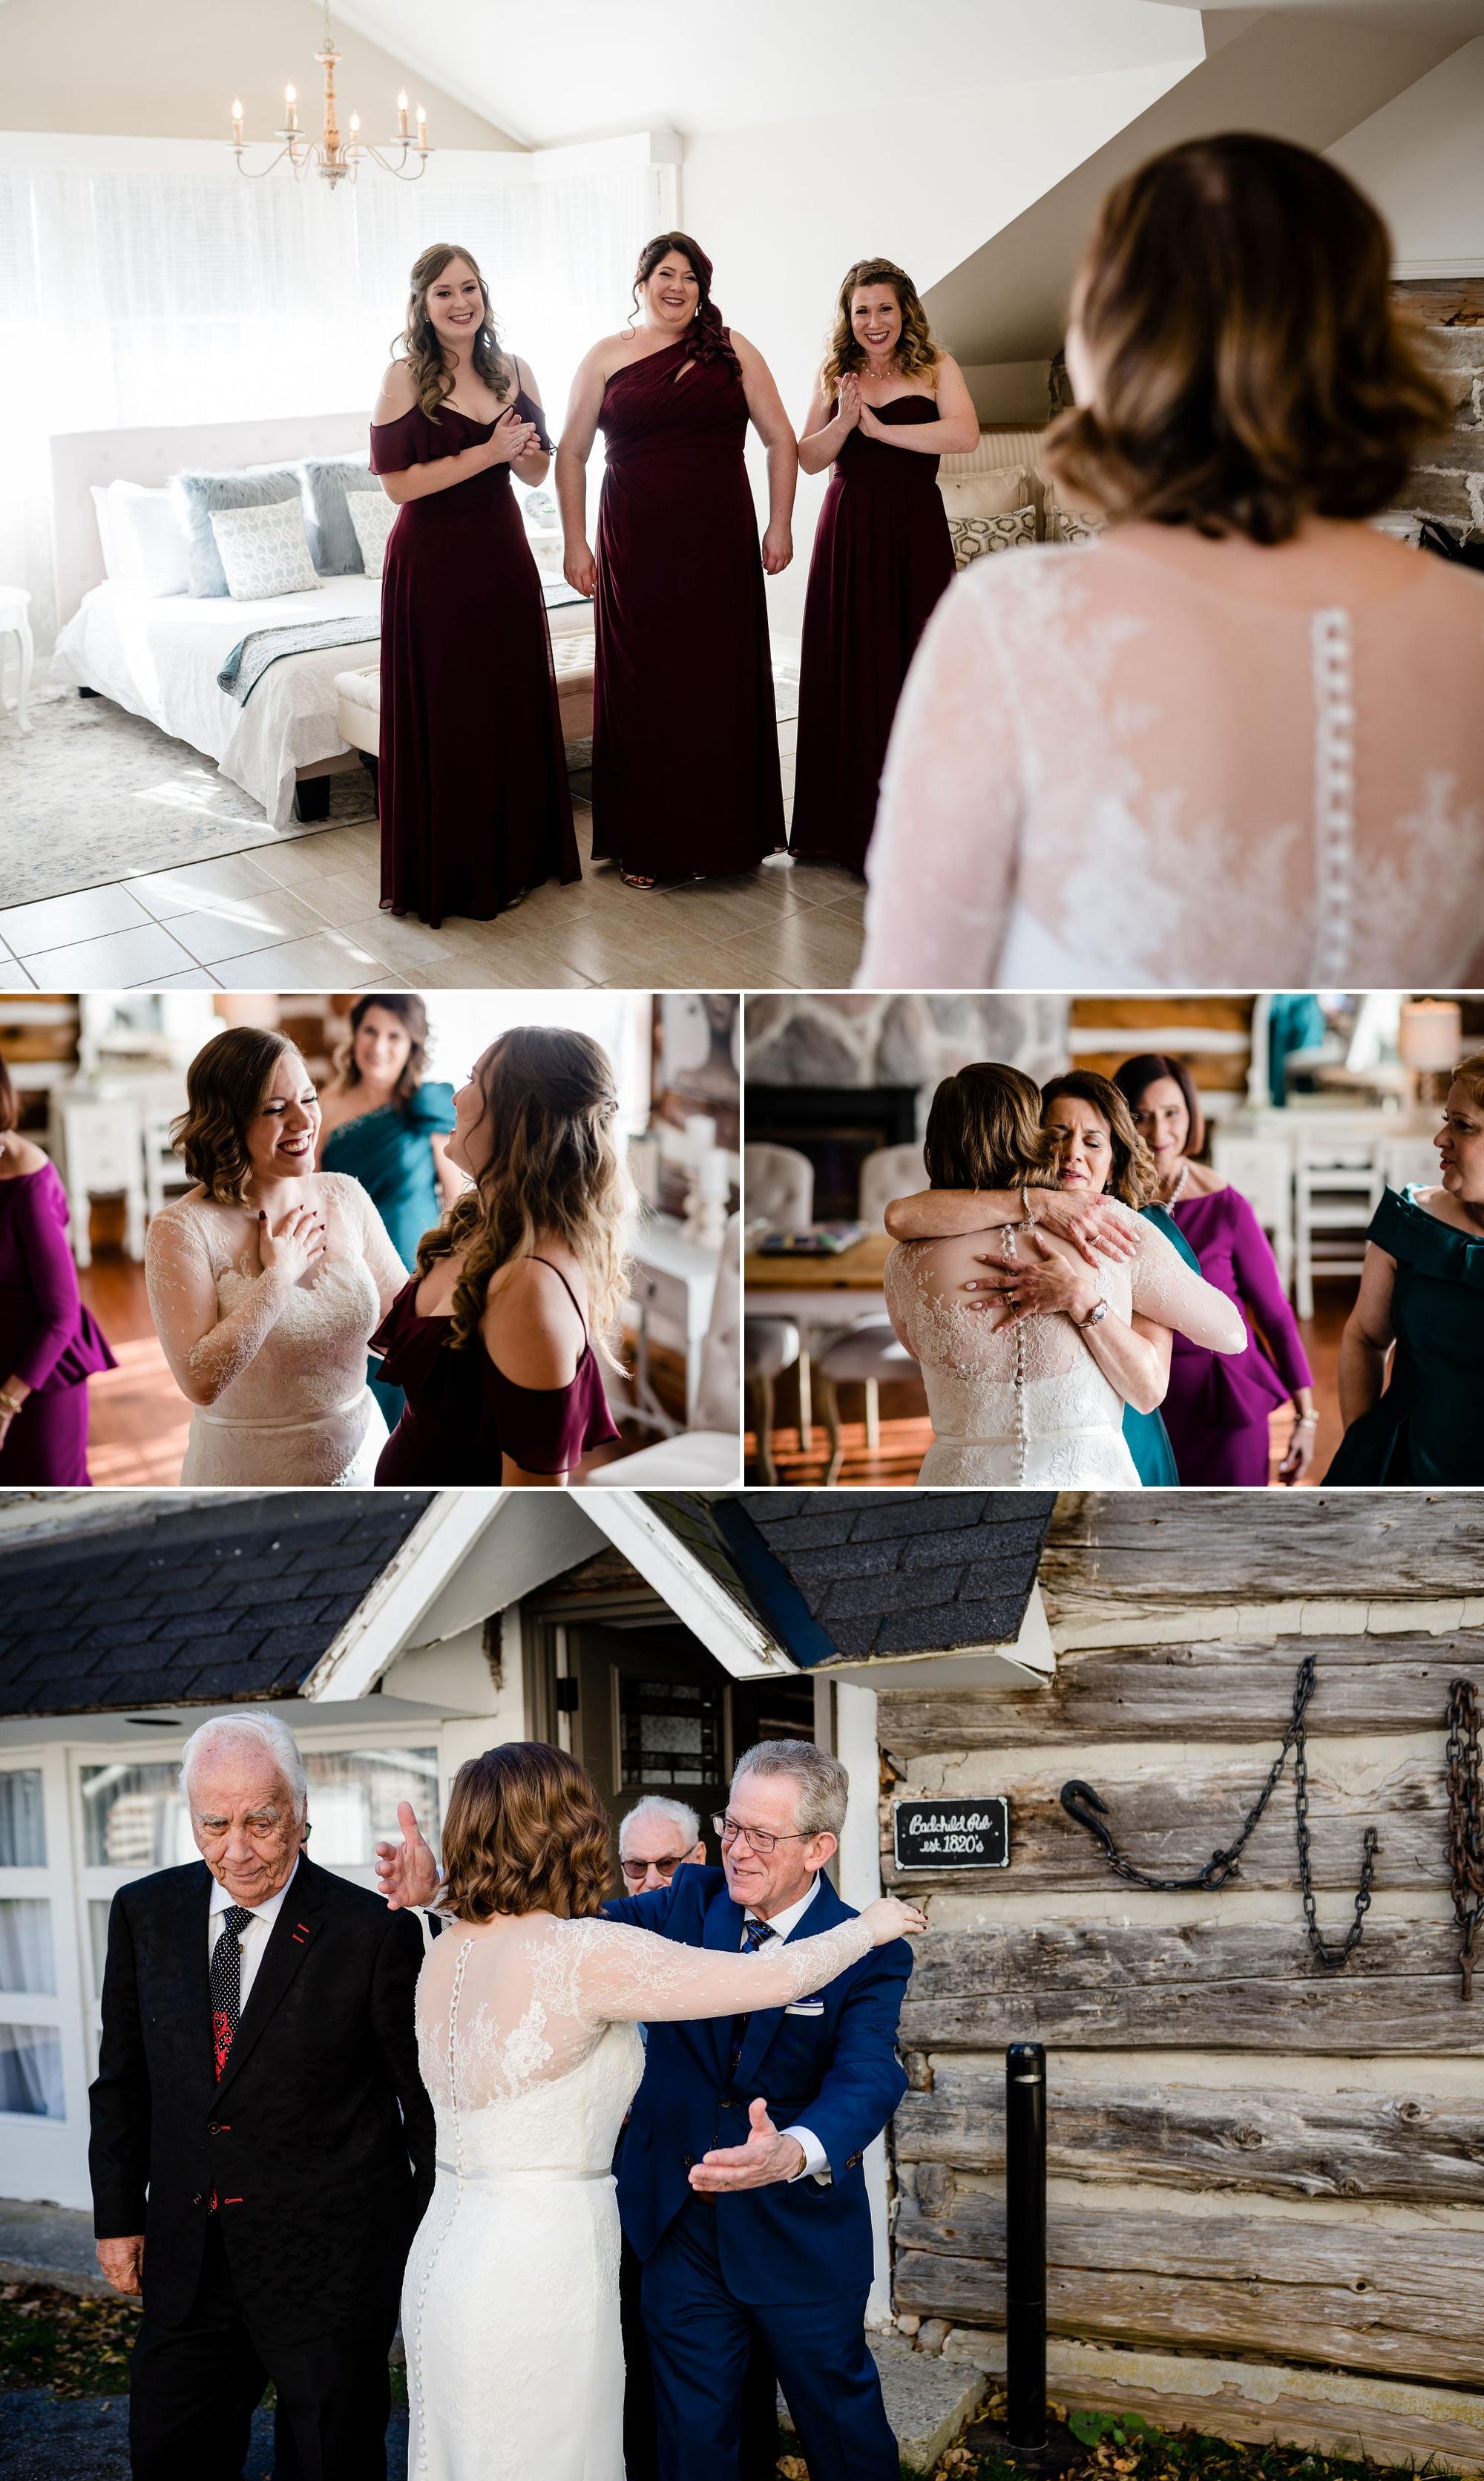 photos of a wedding party seeing the bride in her wedding dress for the first time